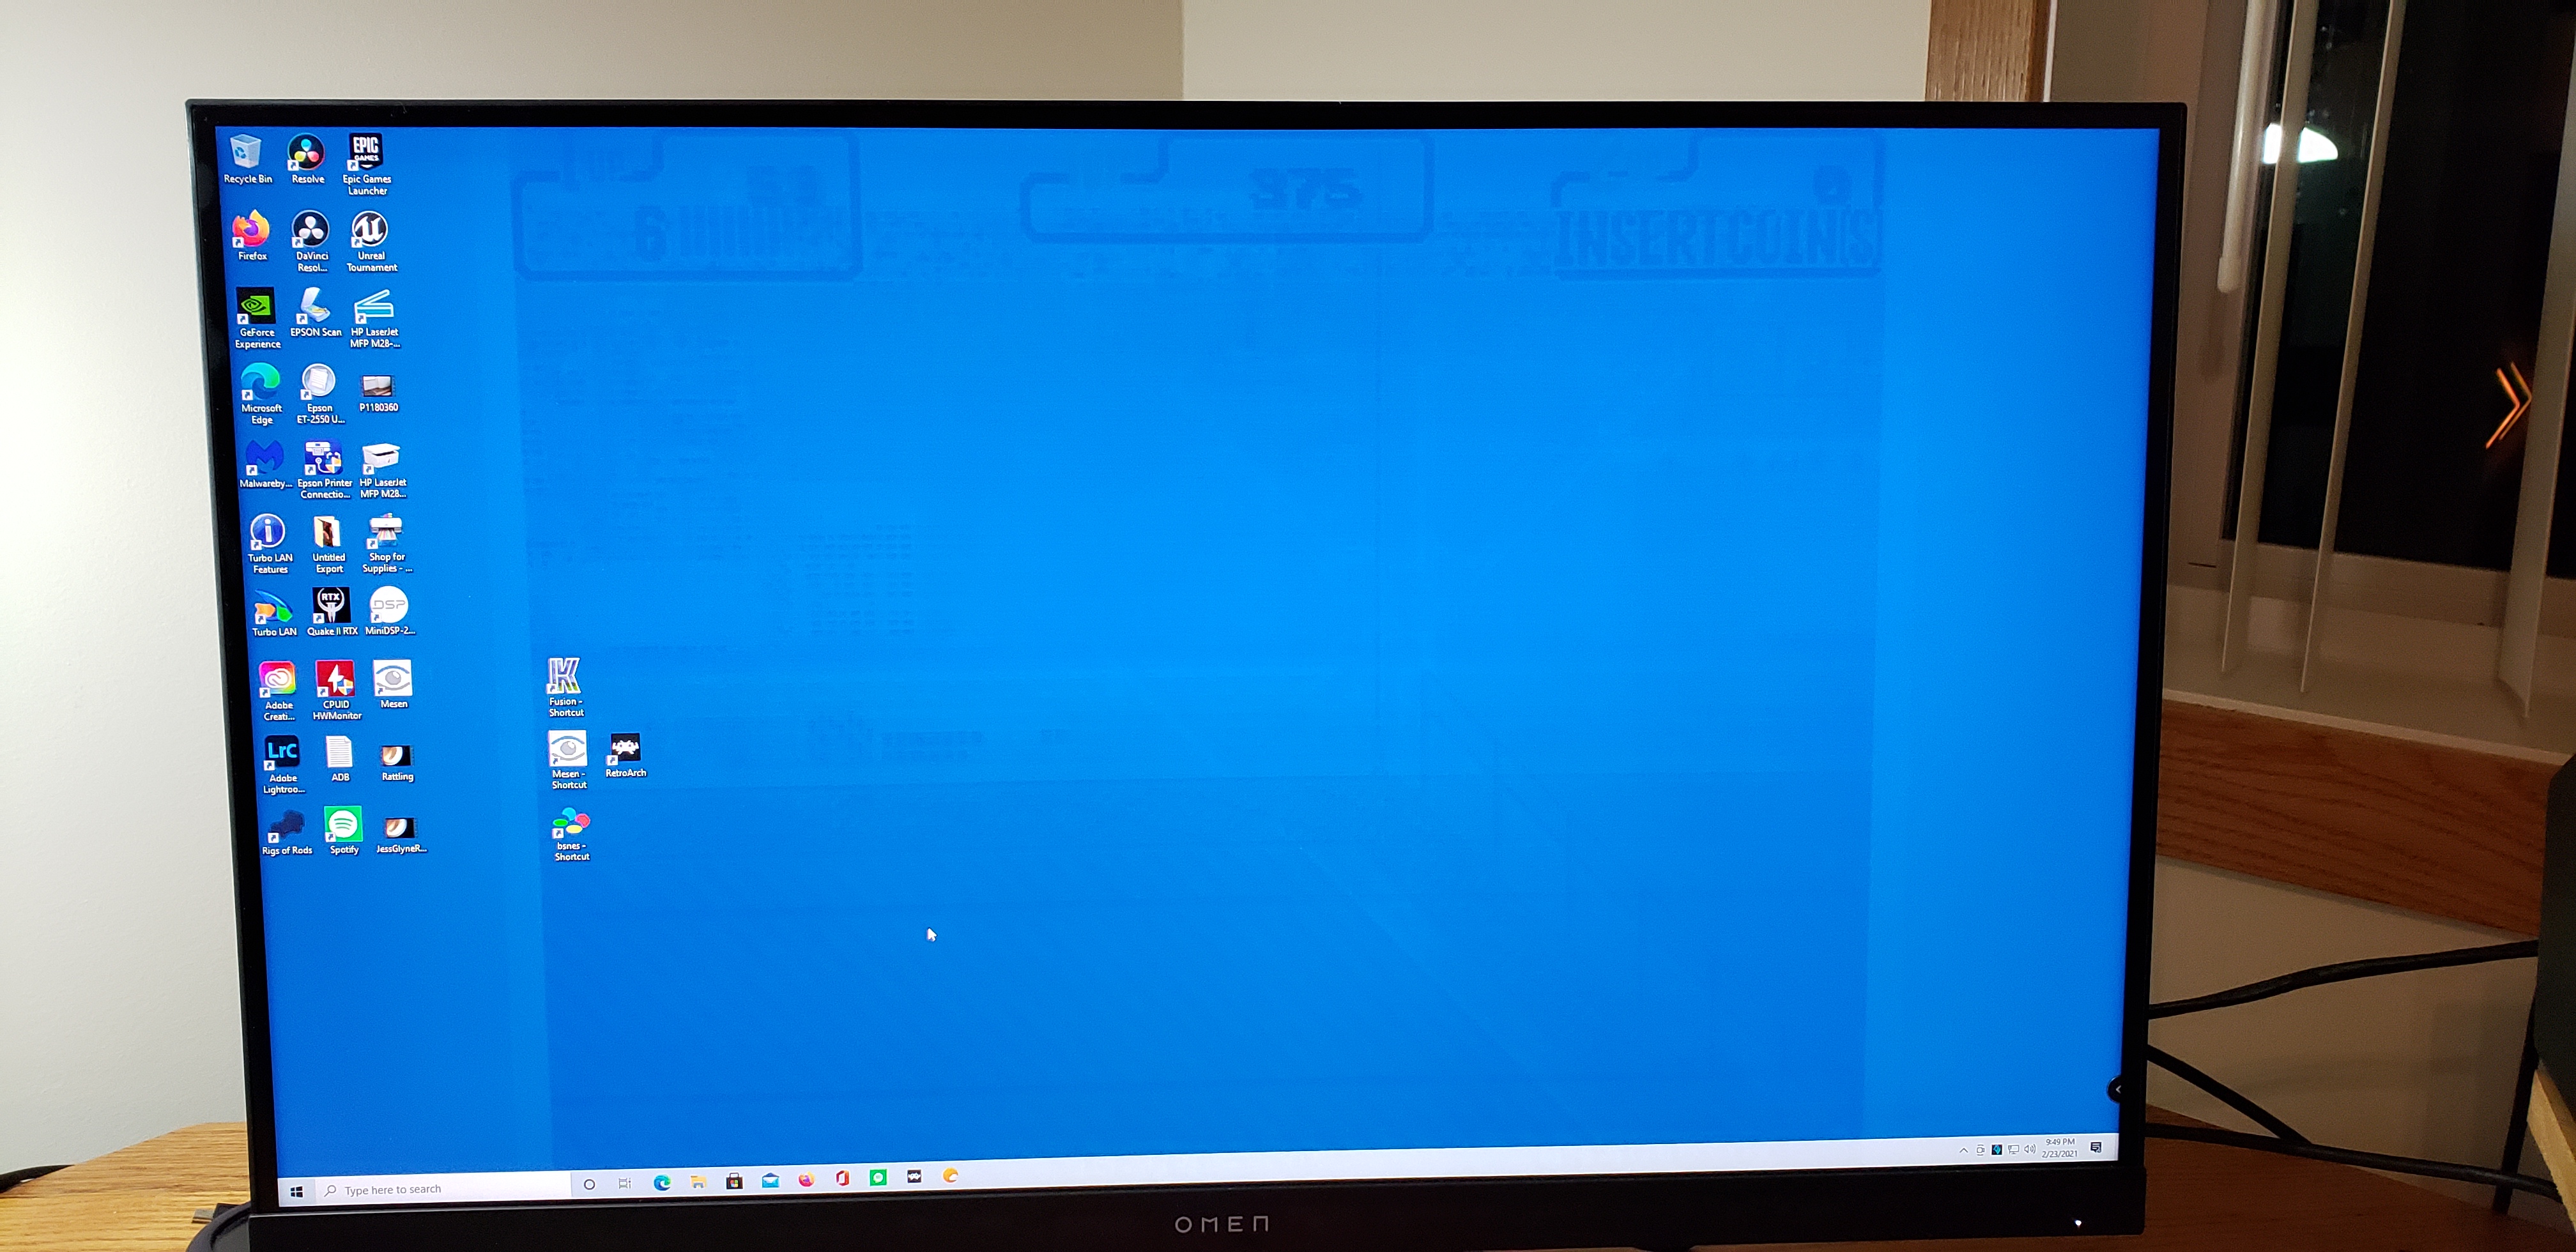 Image Retention' that looks like burn-in on brand new IPS Monitor